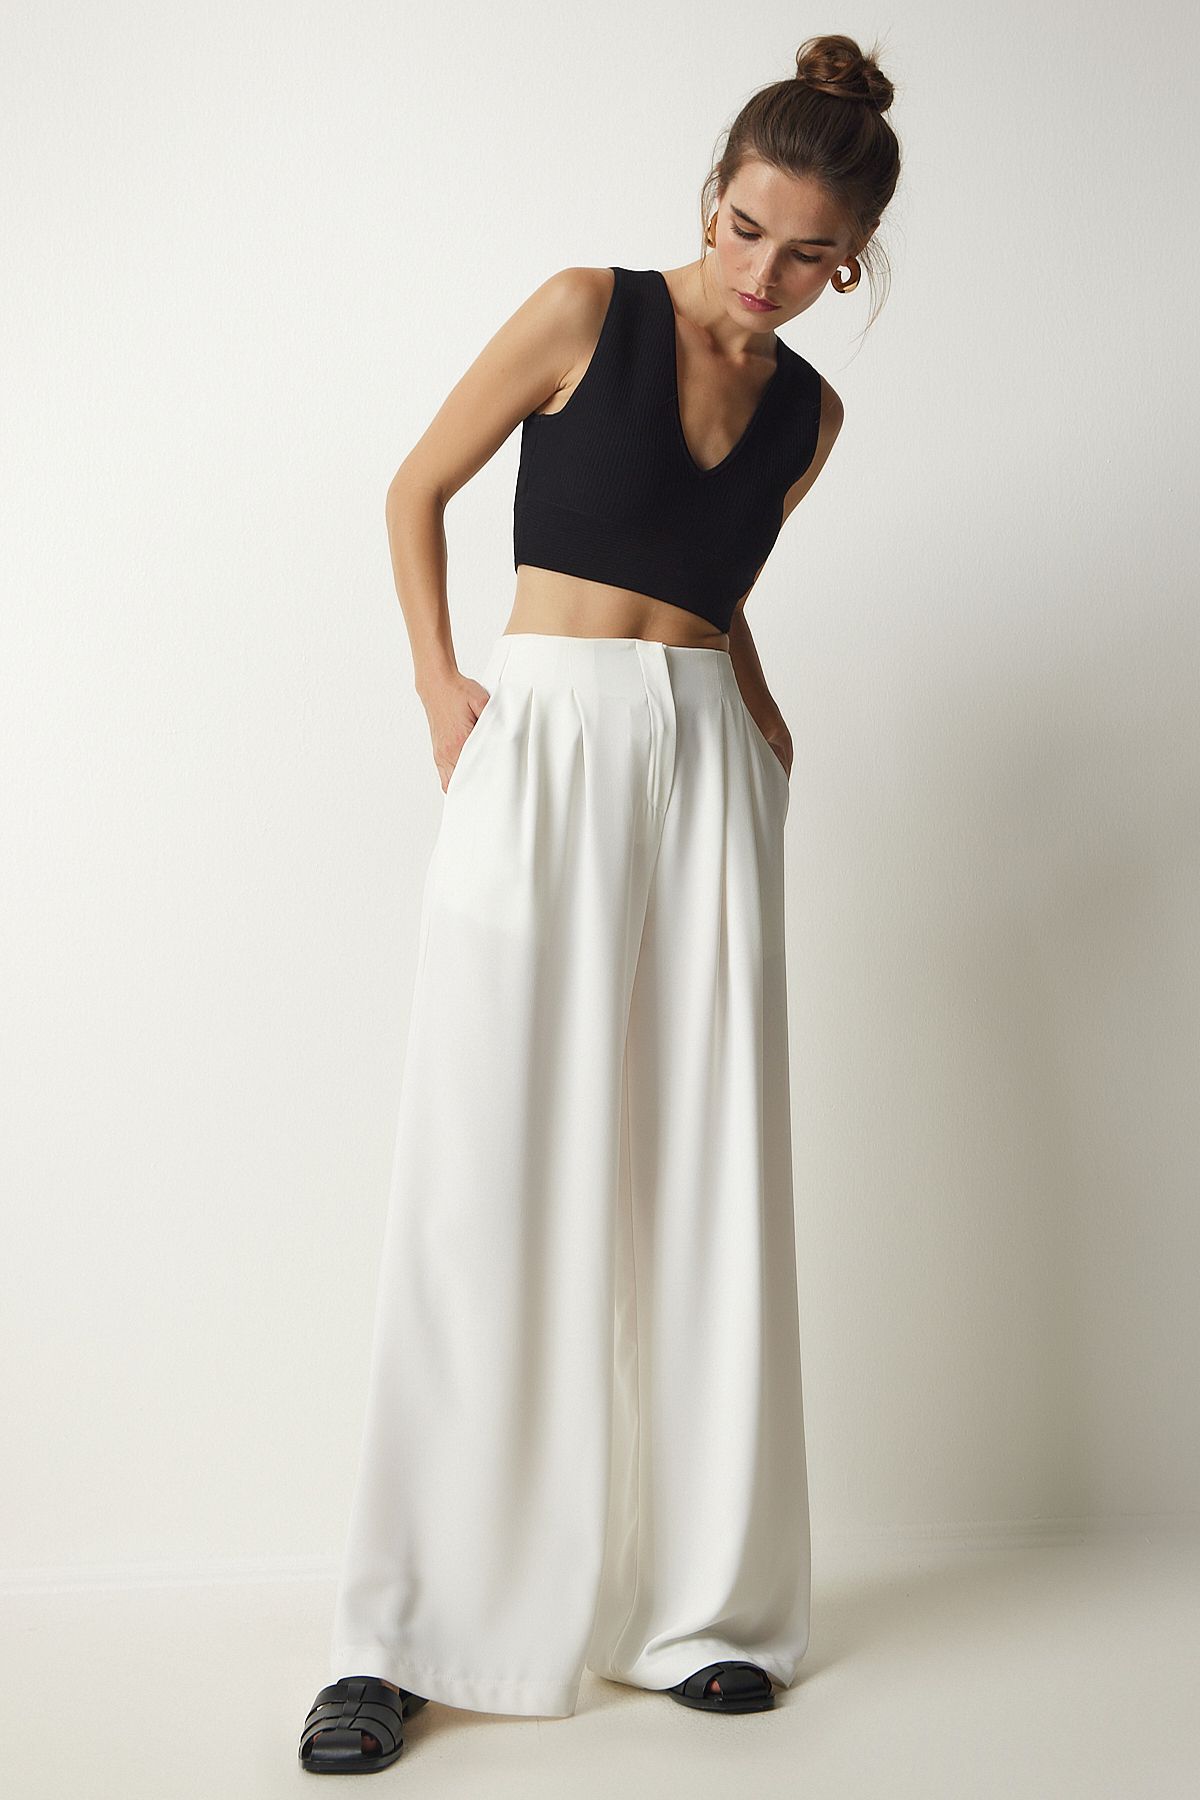 Women White Pleated Straight Stretchable Pants